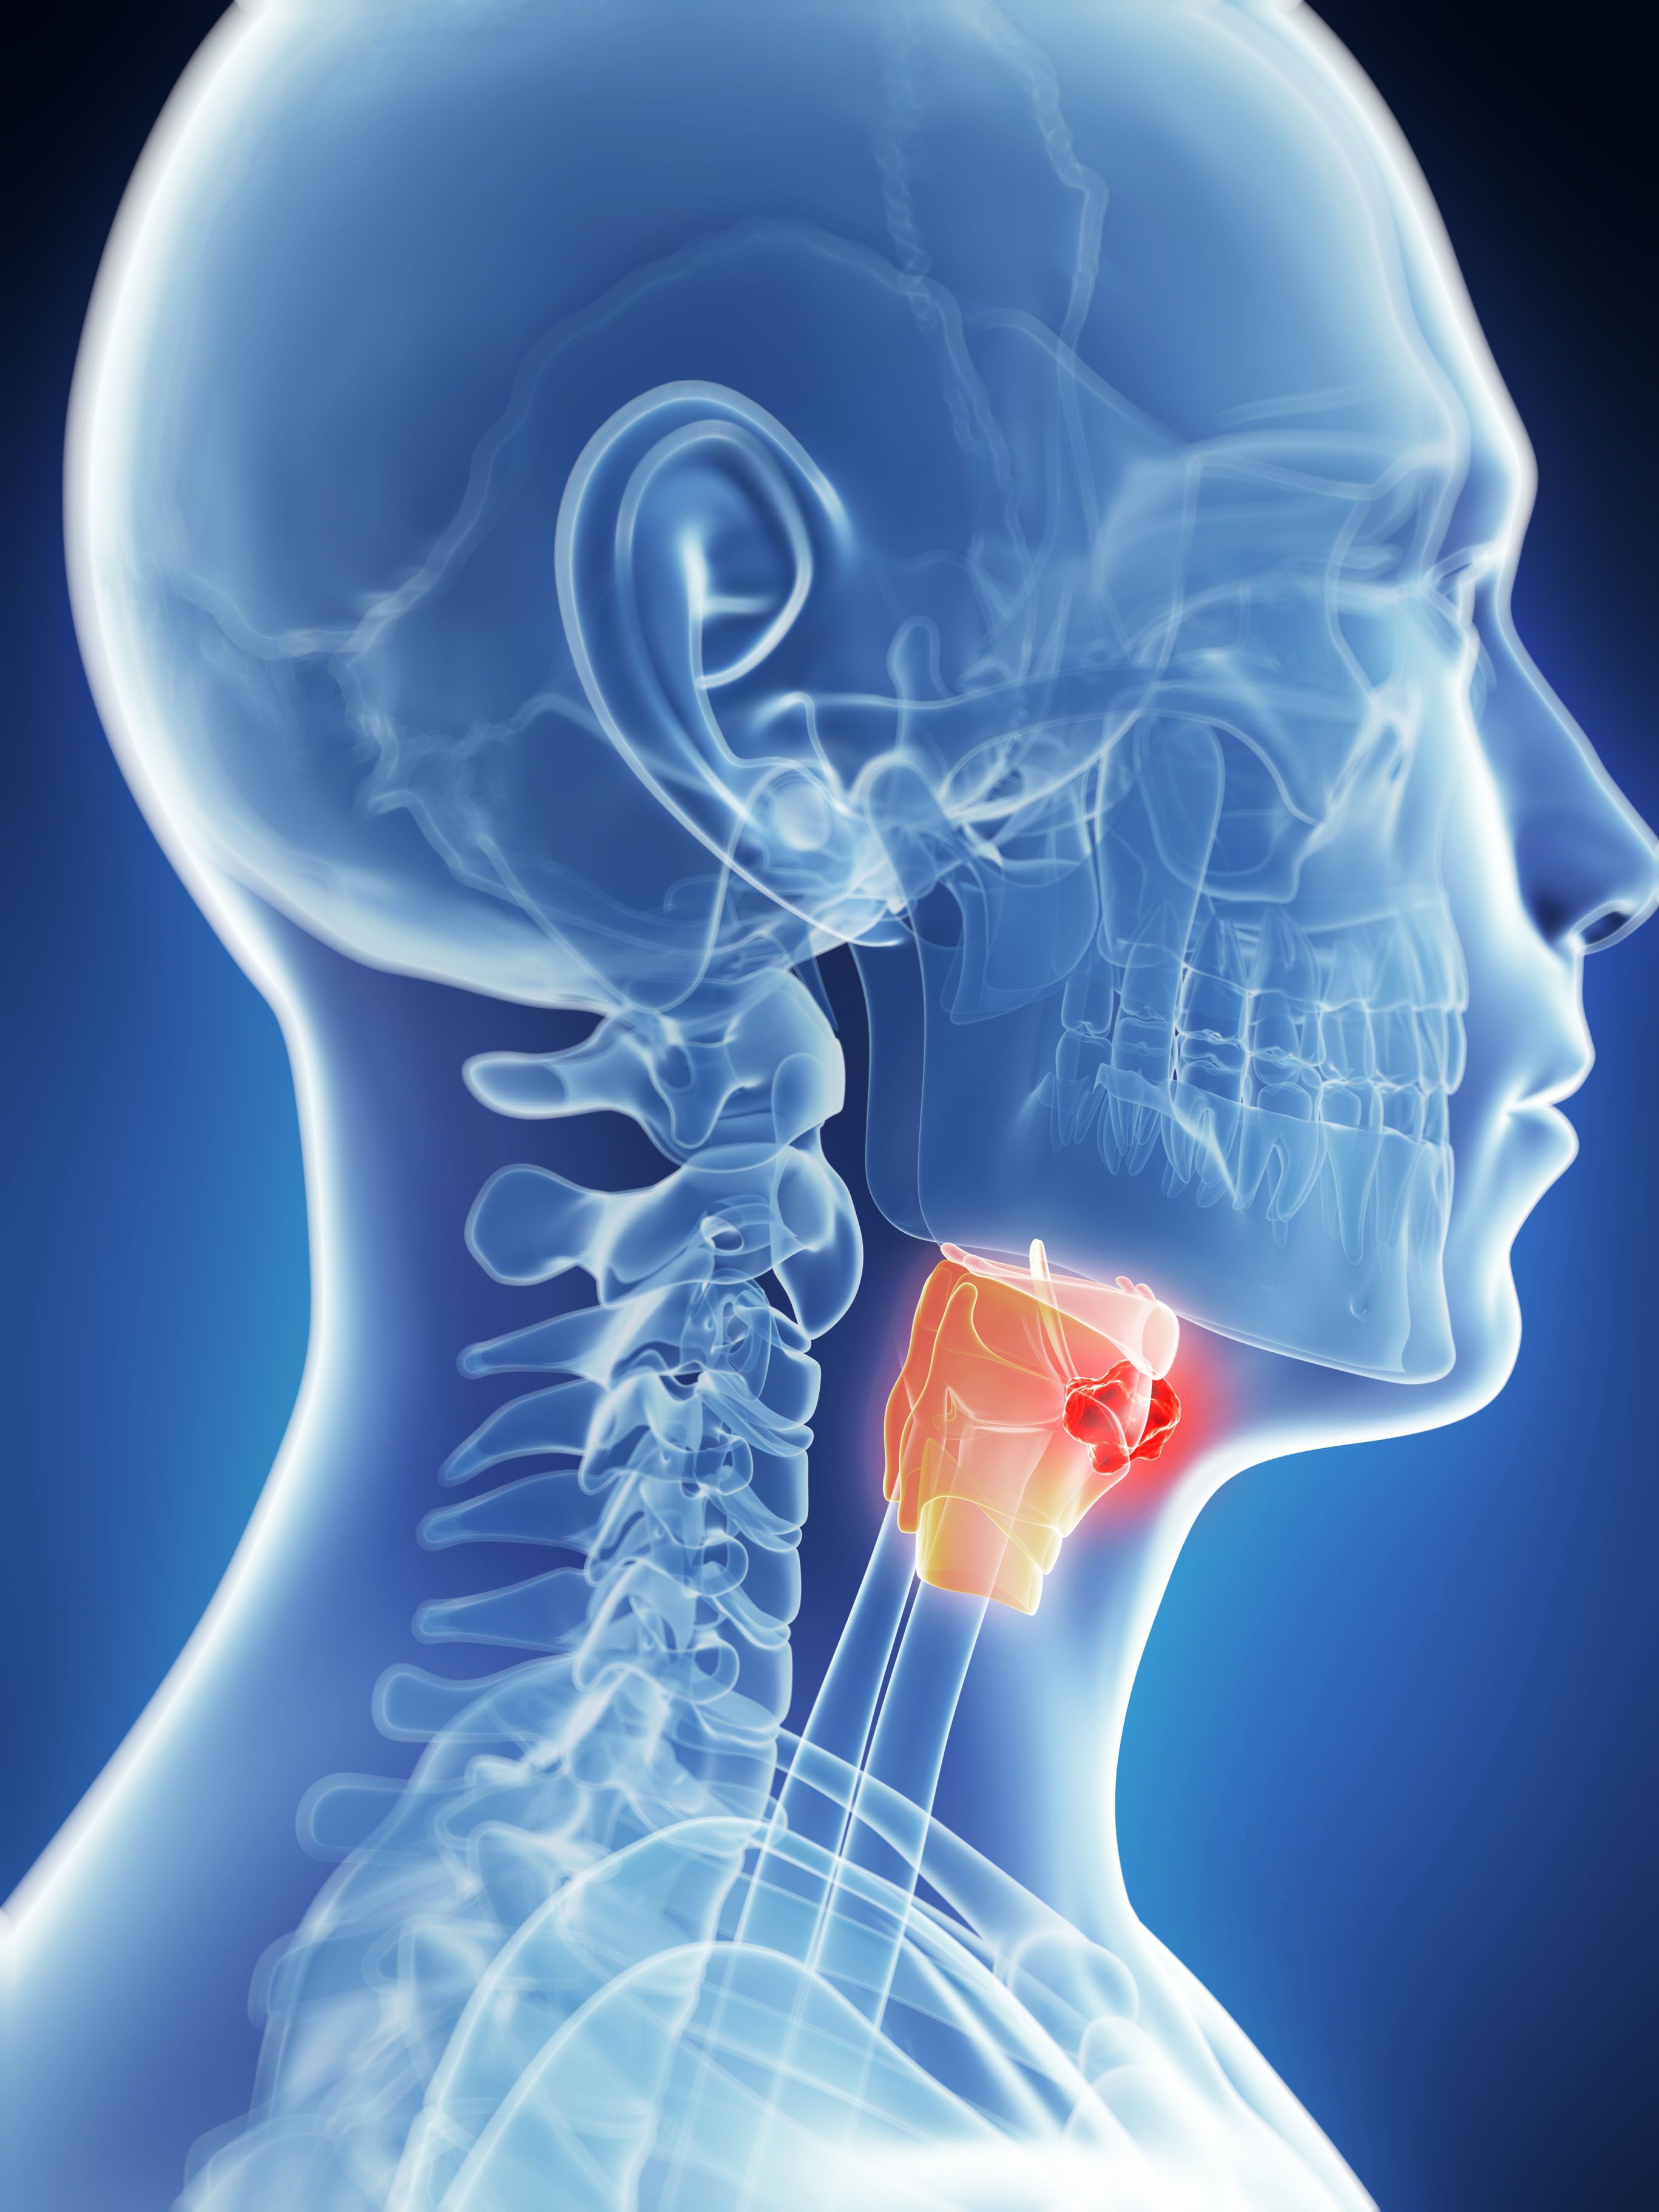 Laryngeal Cancer Treatment and Prognosis